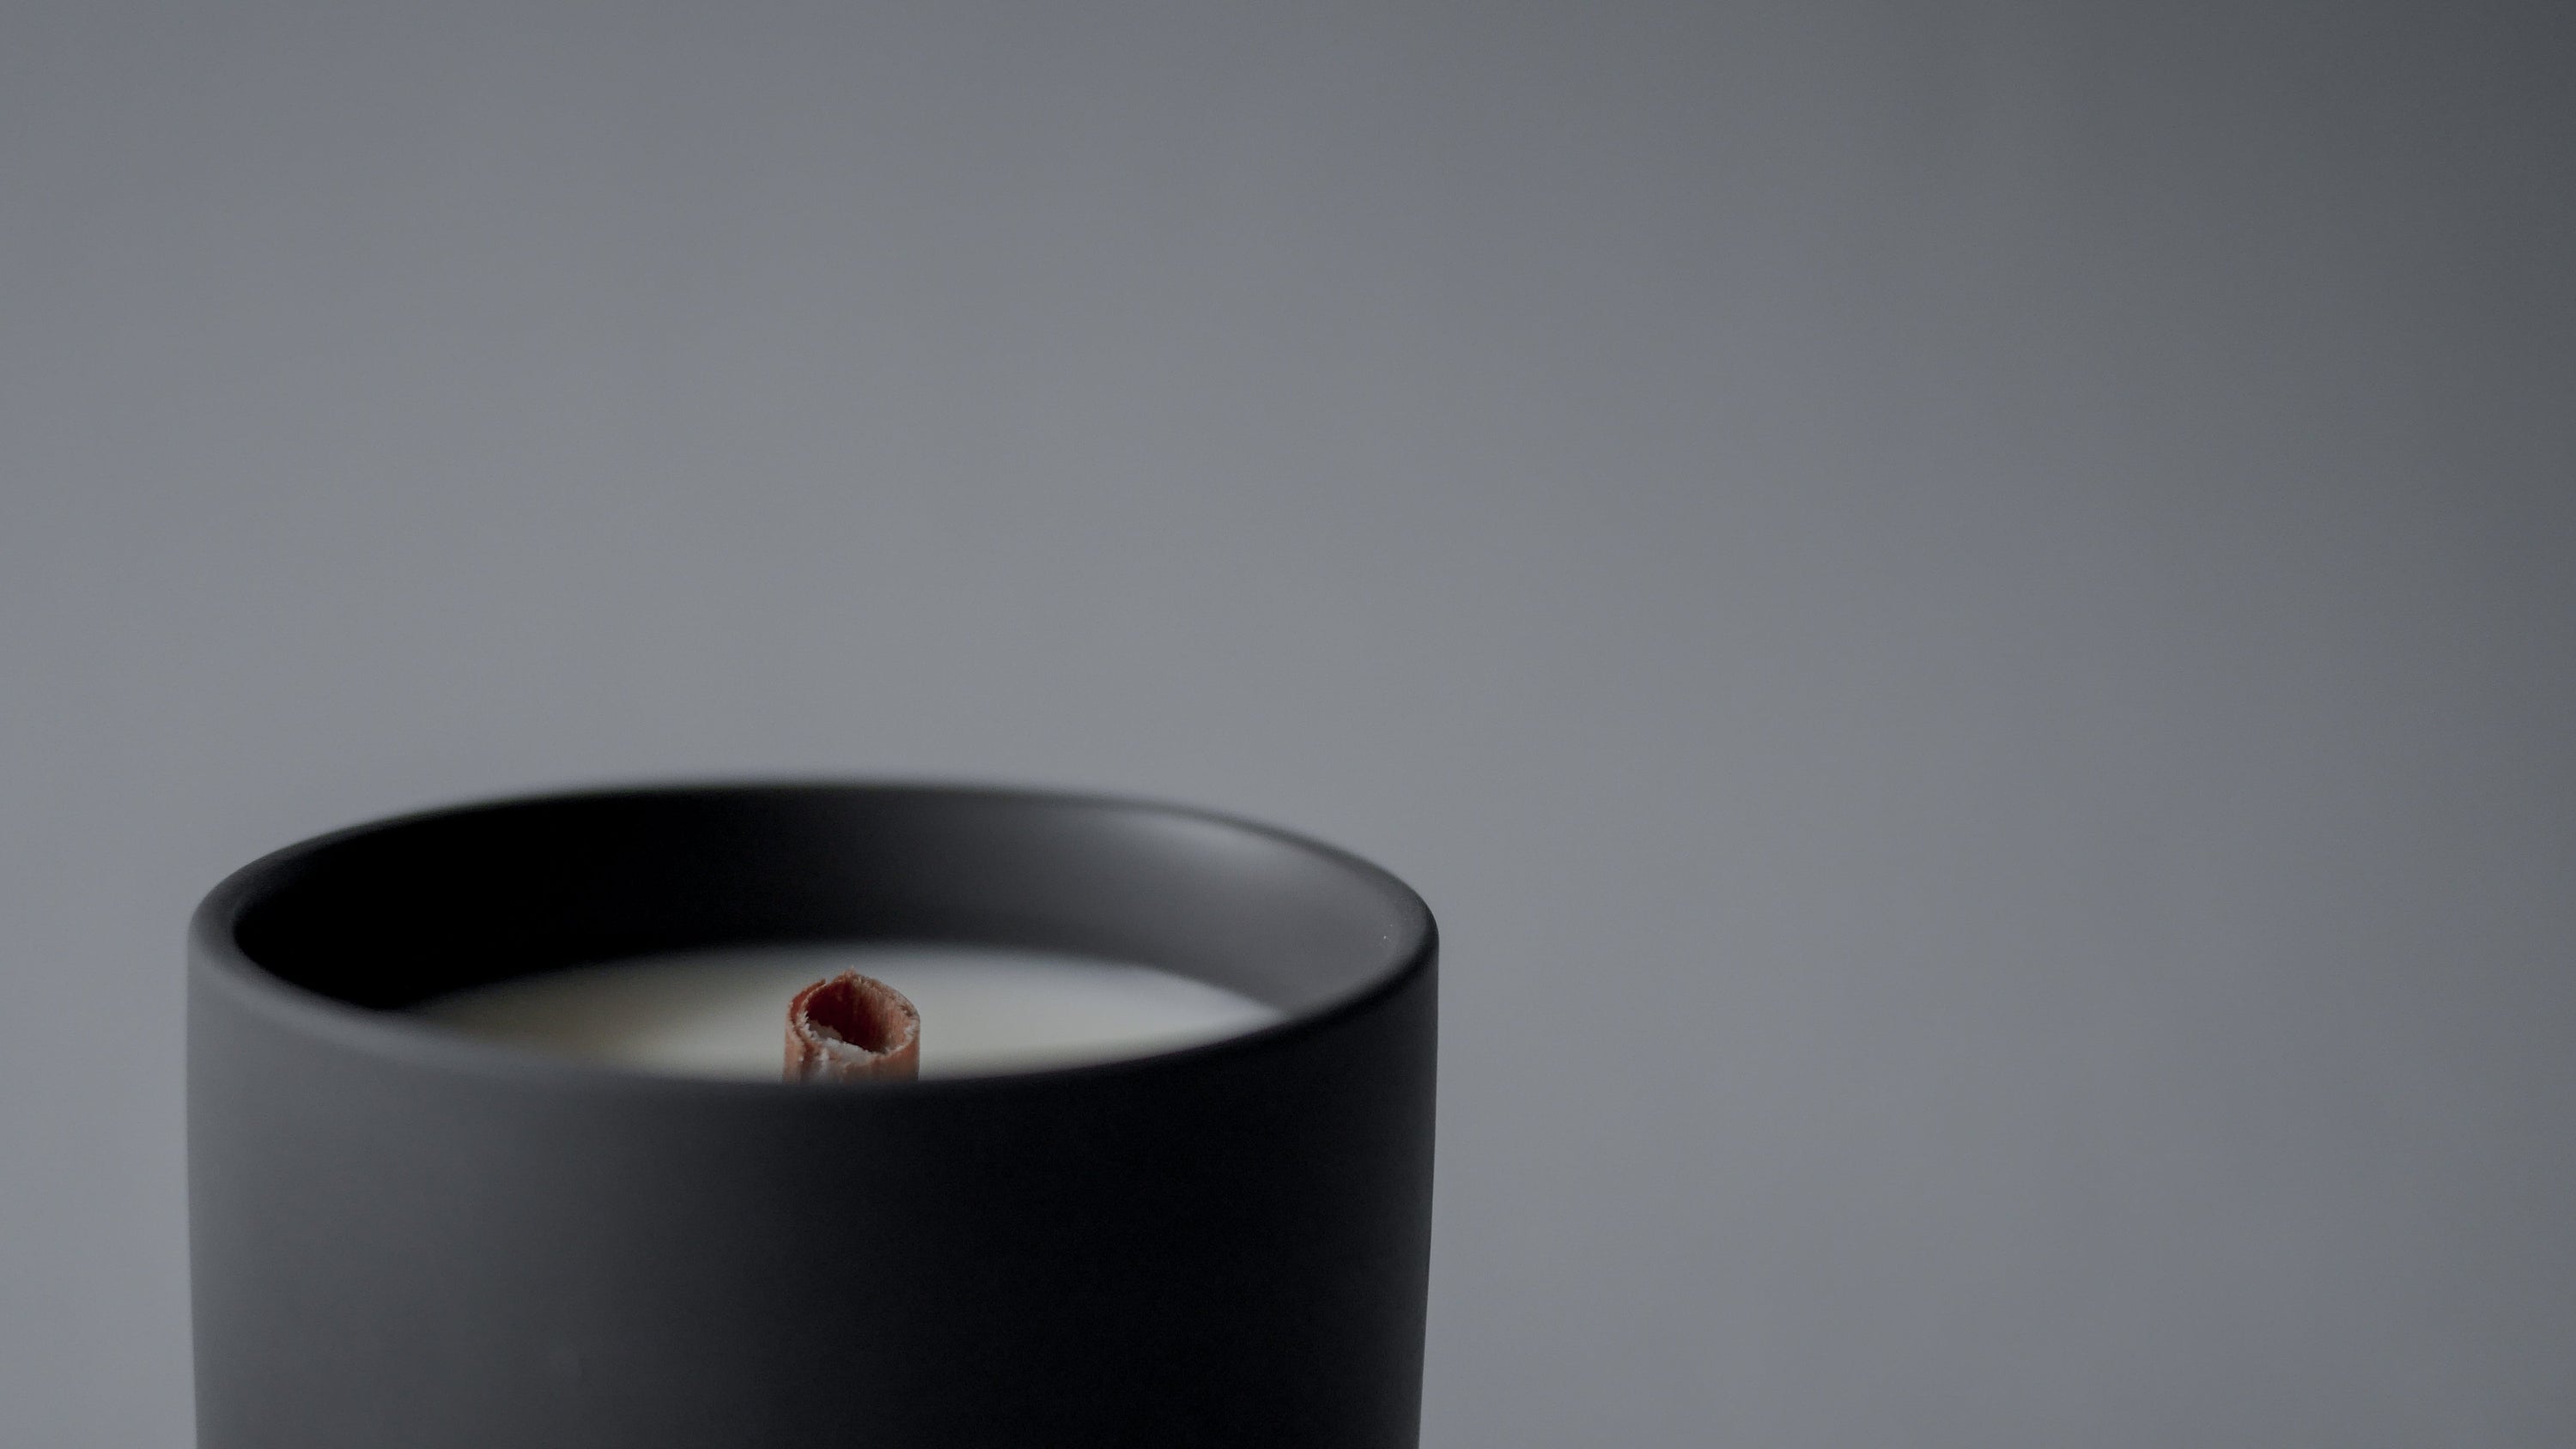 burning grass / scented candle 190g // recollection series